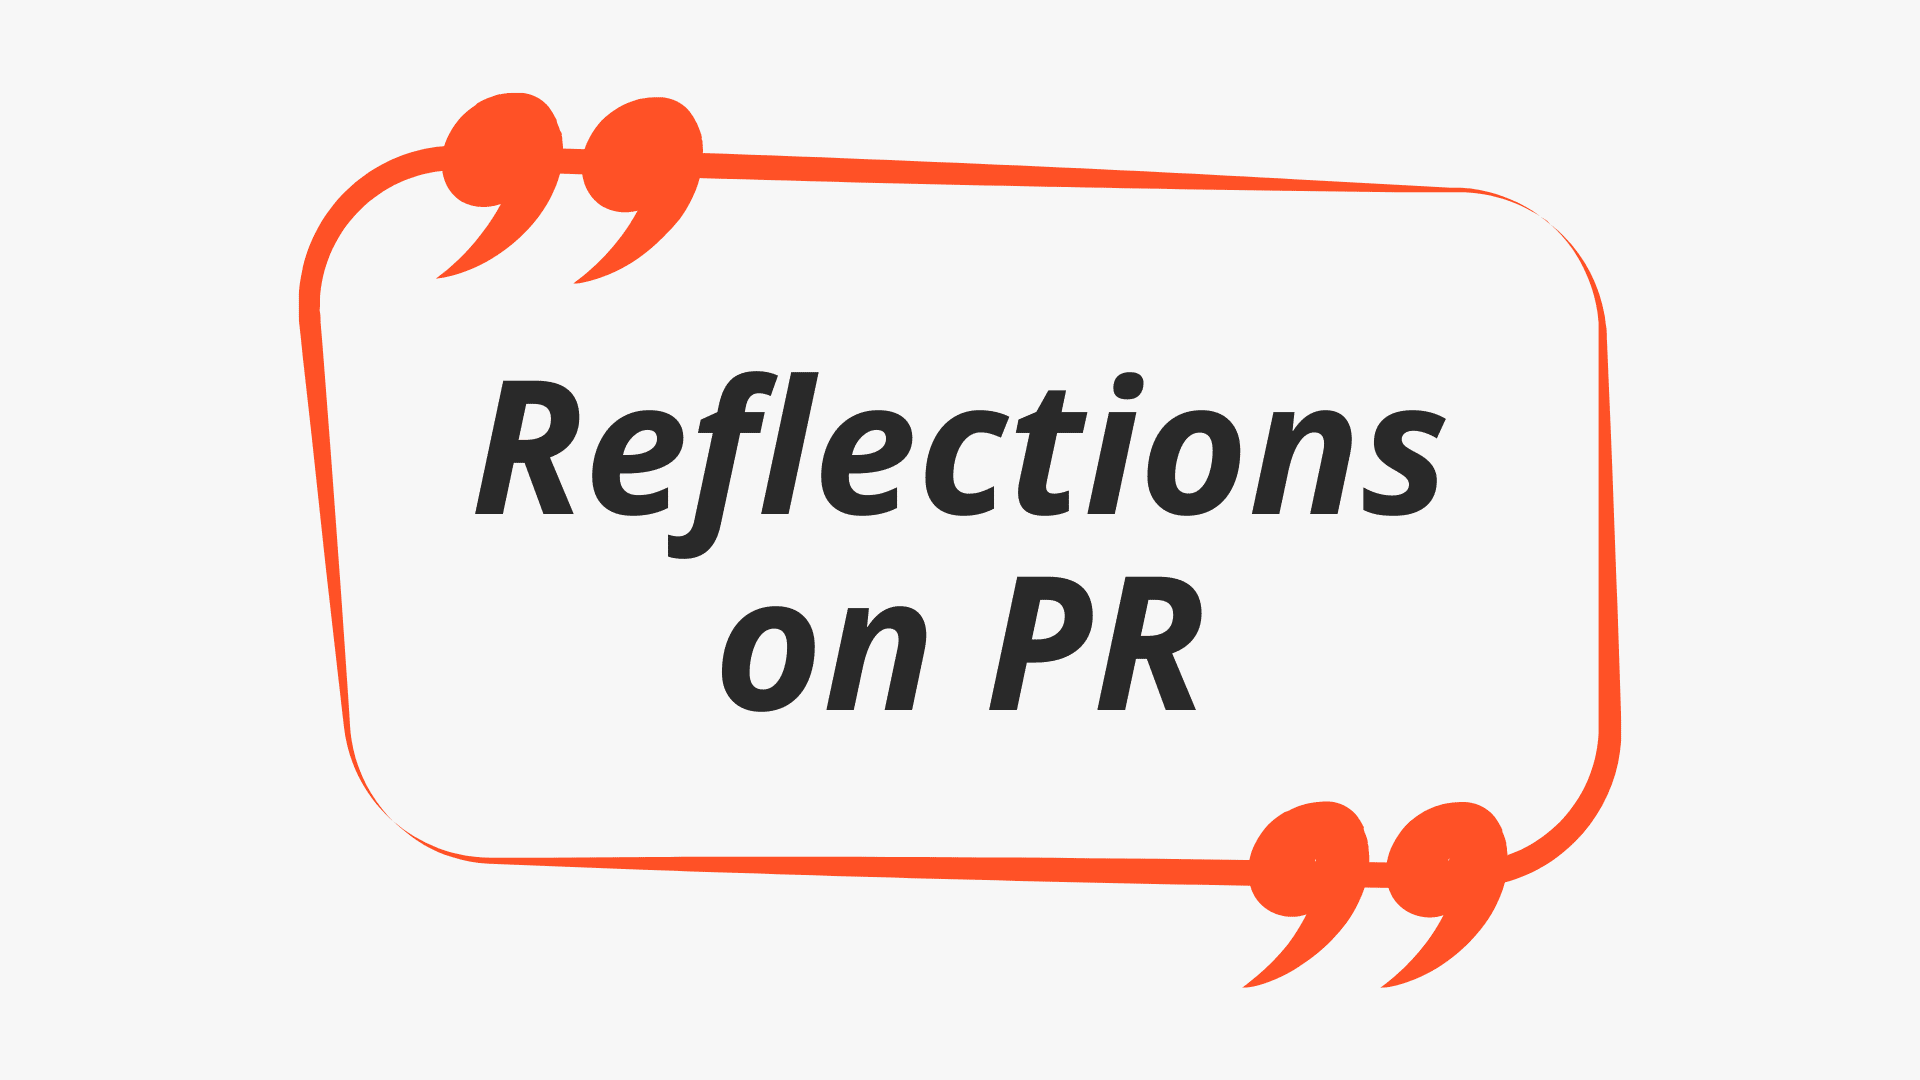 PR in 2022: Top tips from the Agility webinar and PR Profiles guests